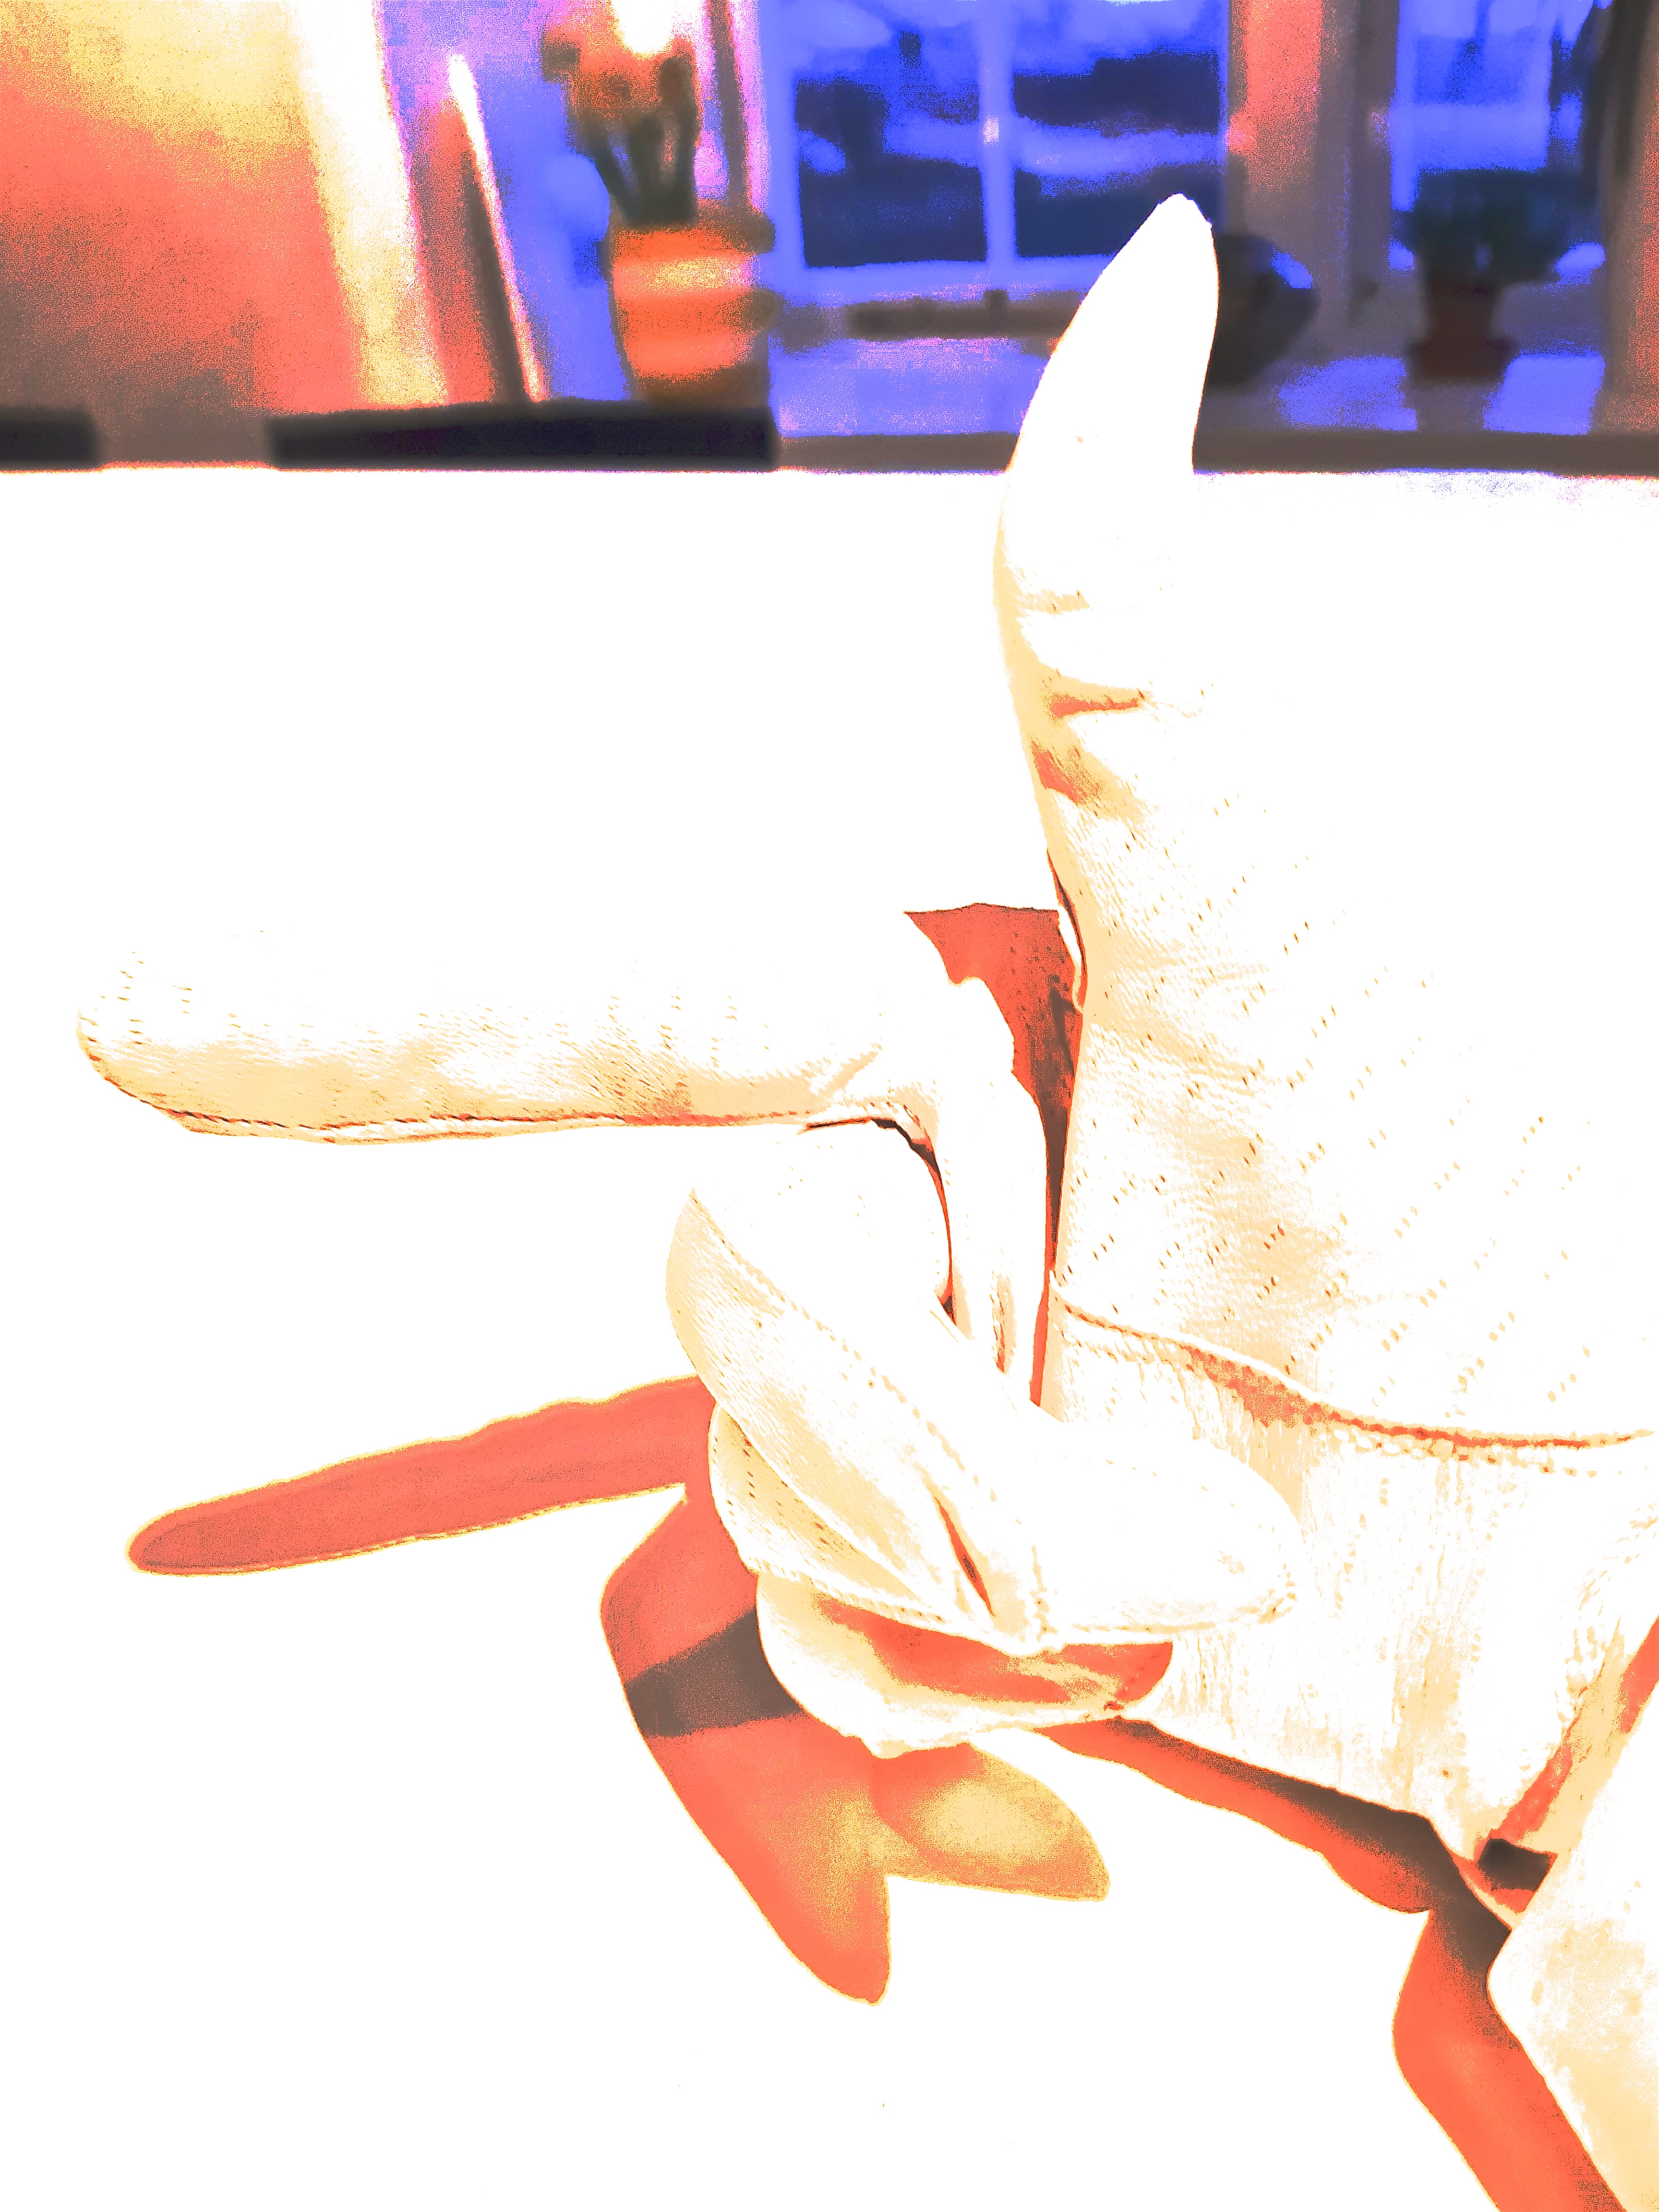 Cream coloured leather gloved hand pointing a finger. Bleached out image, with a colourful abstract rectangle at the top of the page.